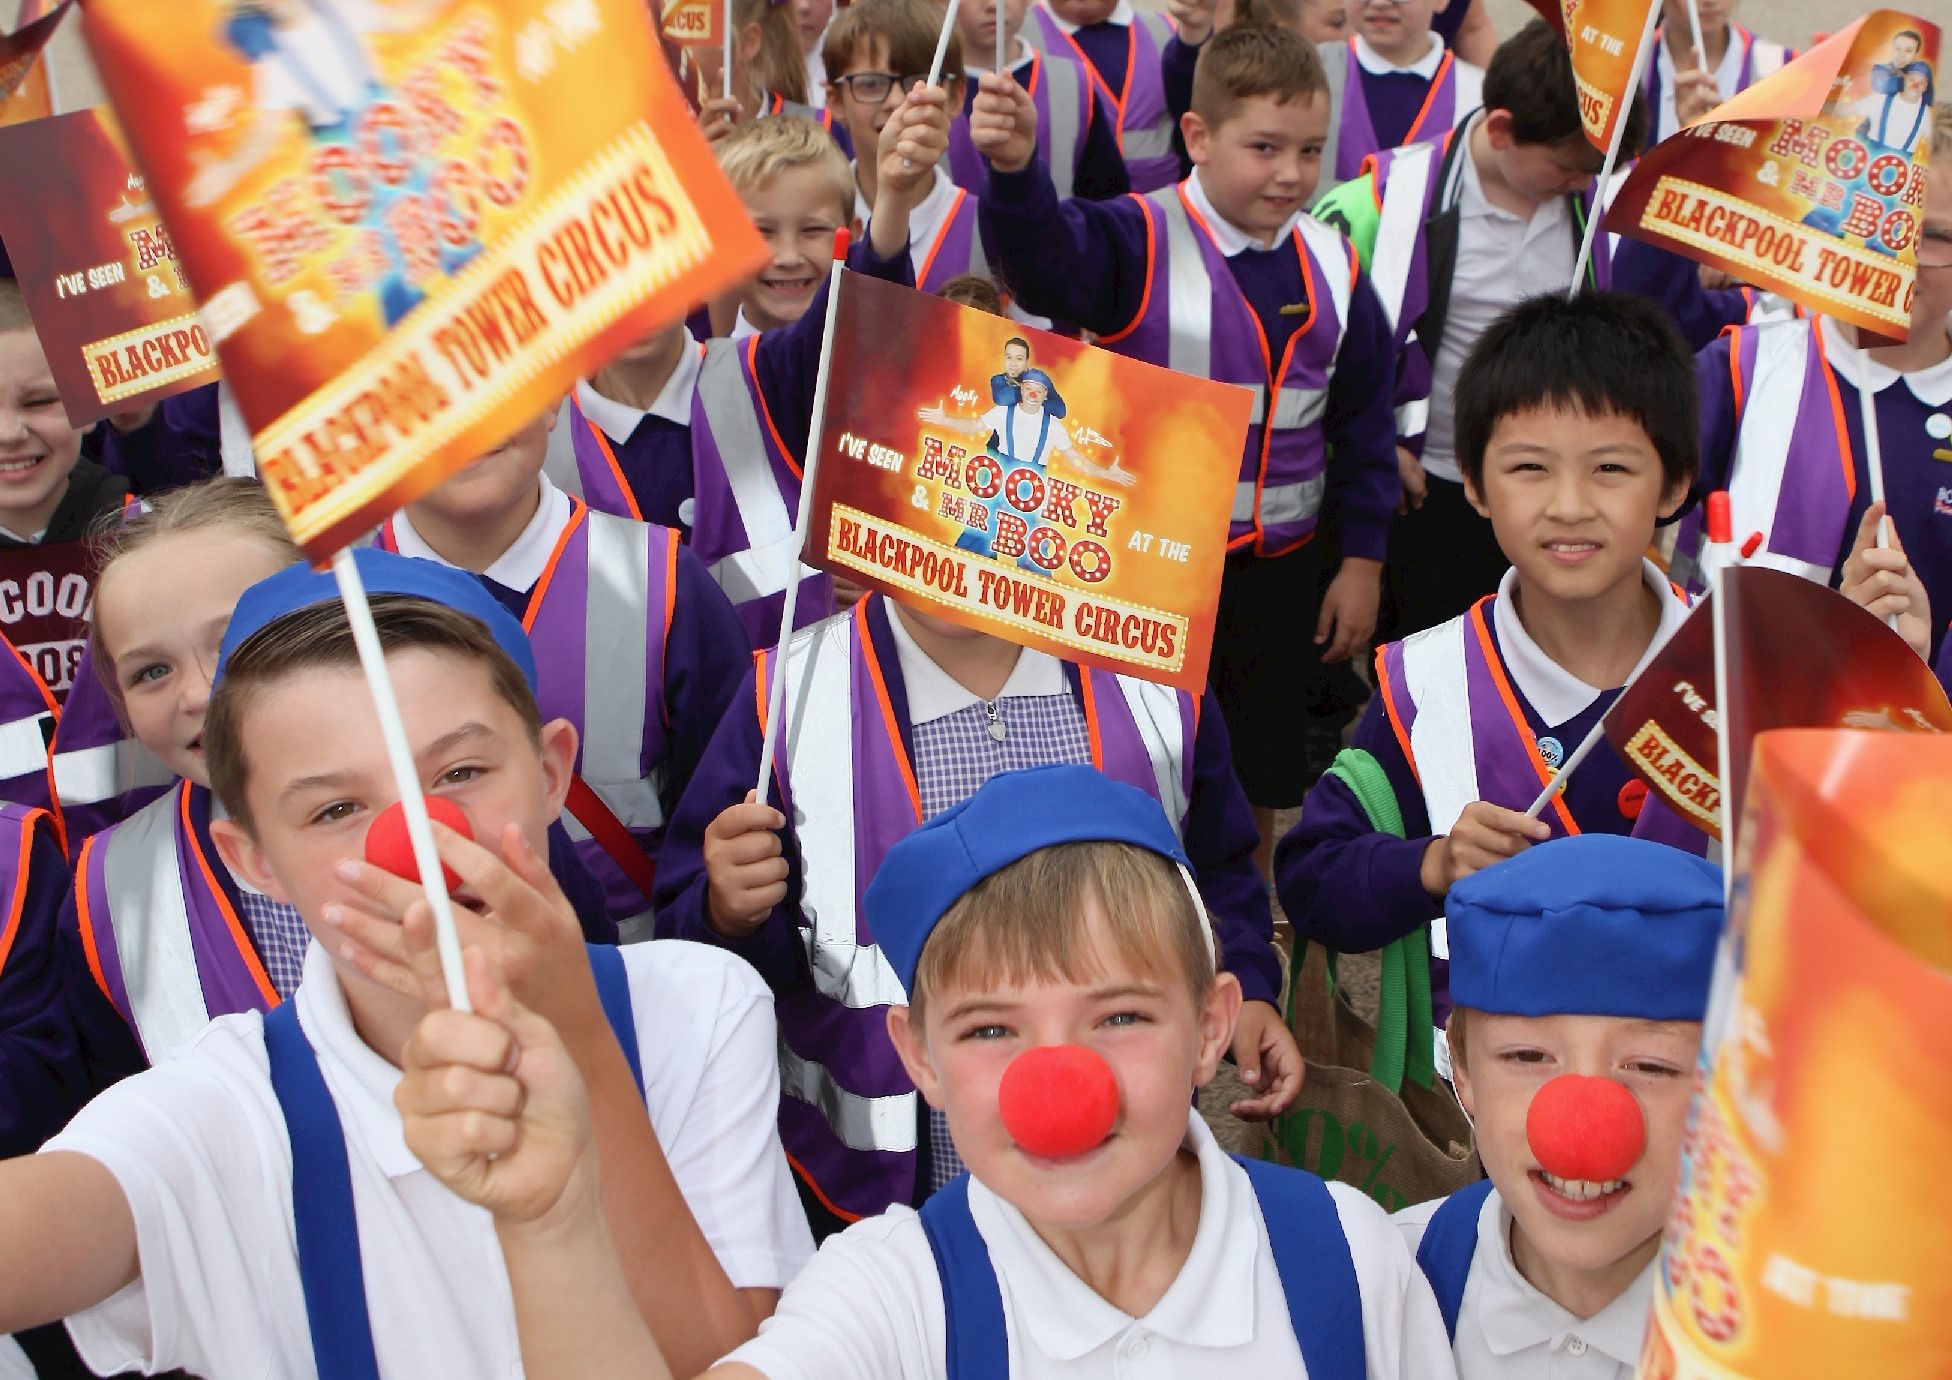 School Clowns at the Blackpool Tower Circus